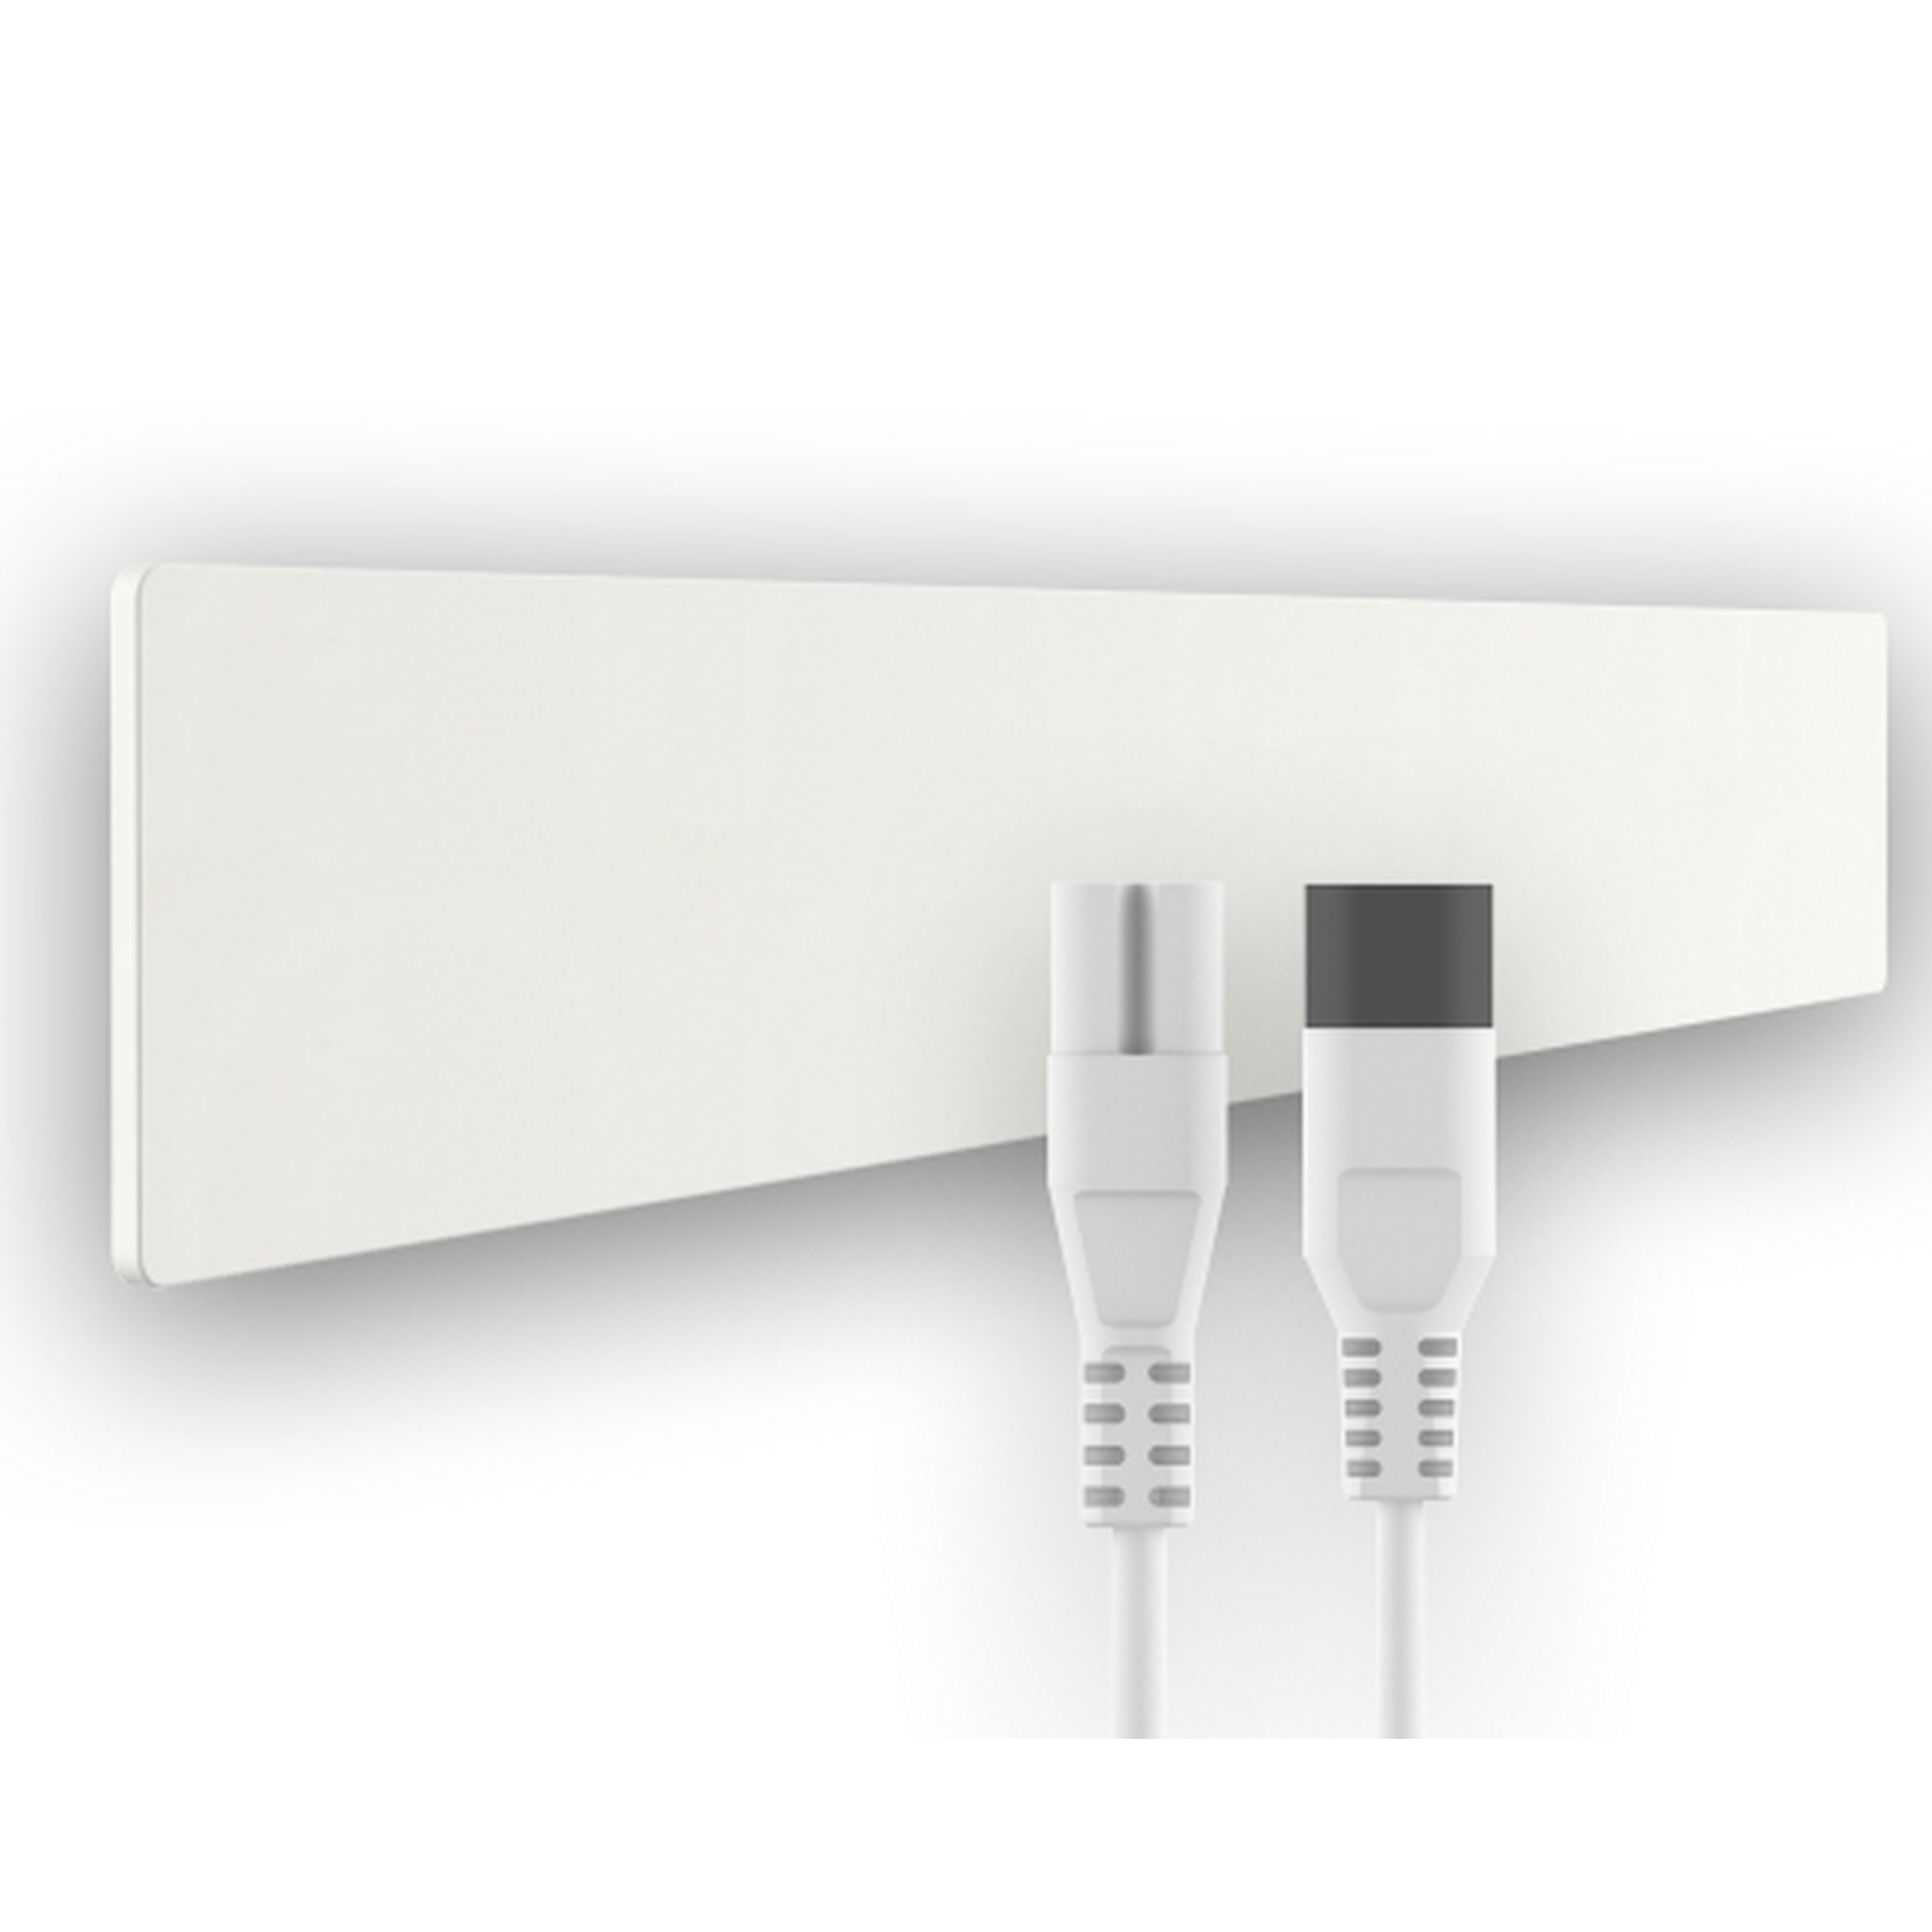 Schimmel Dry 'EDH-WHI-SDRY-M2' weiß 55 W + product picture